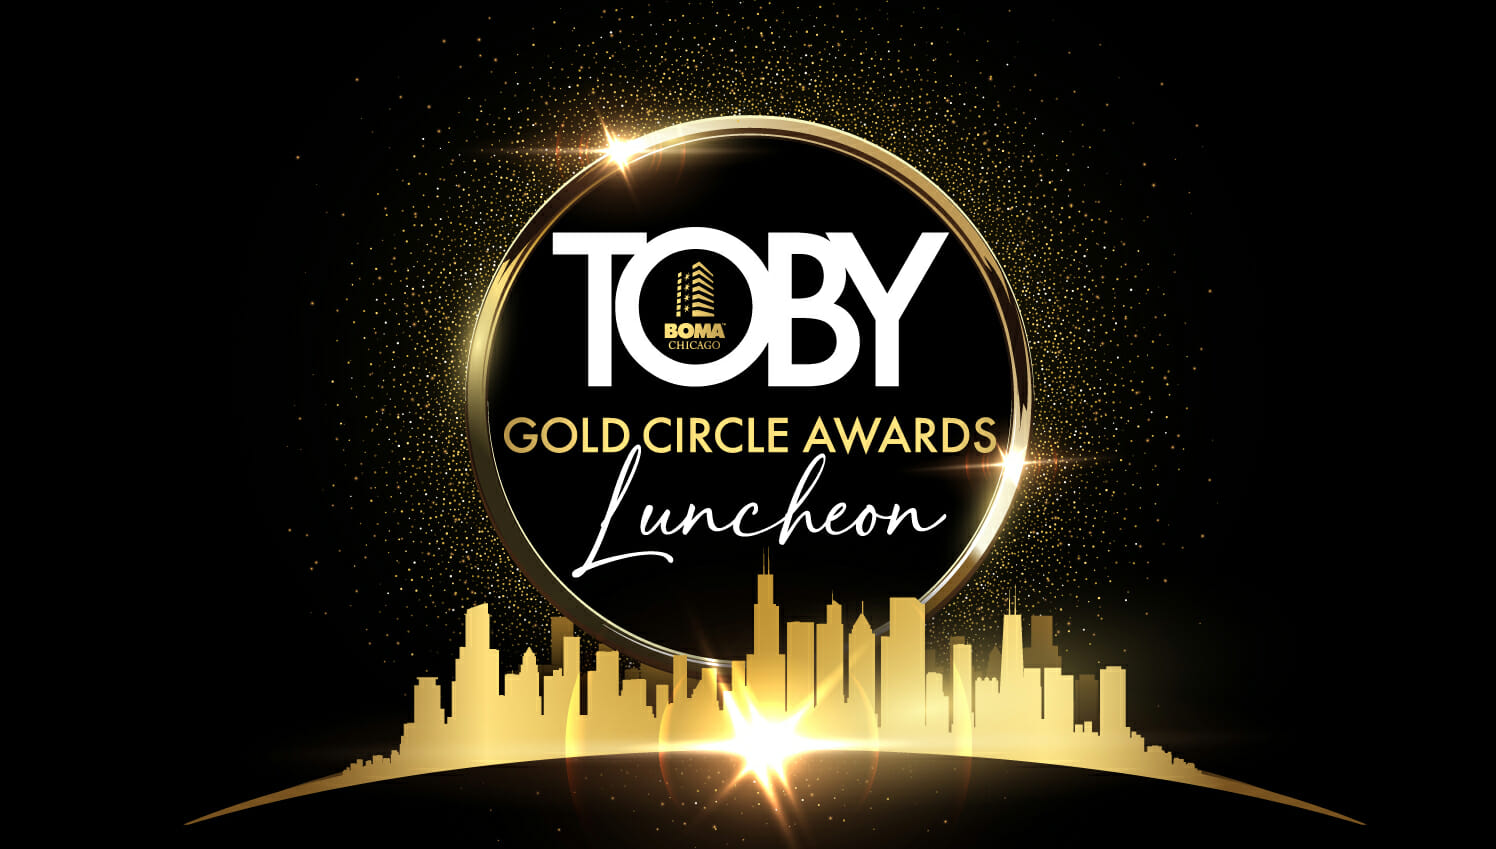 TOBY Gold Circle Awards Luncheon Logo